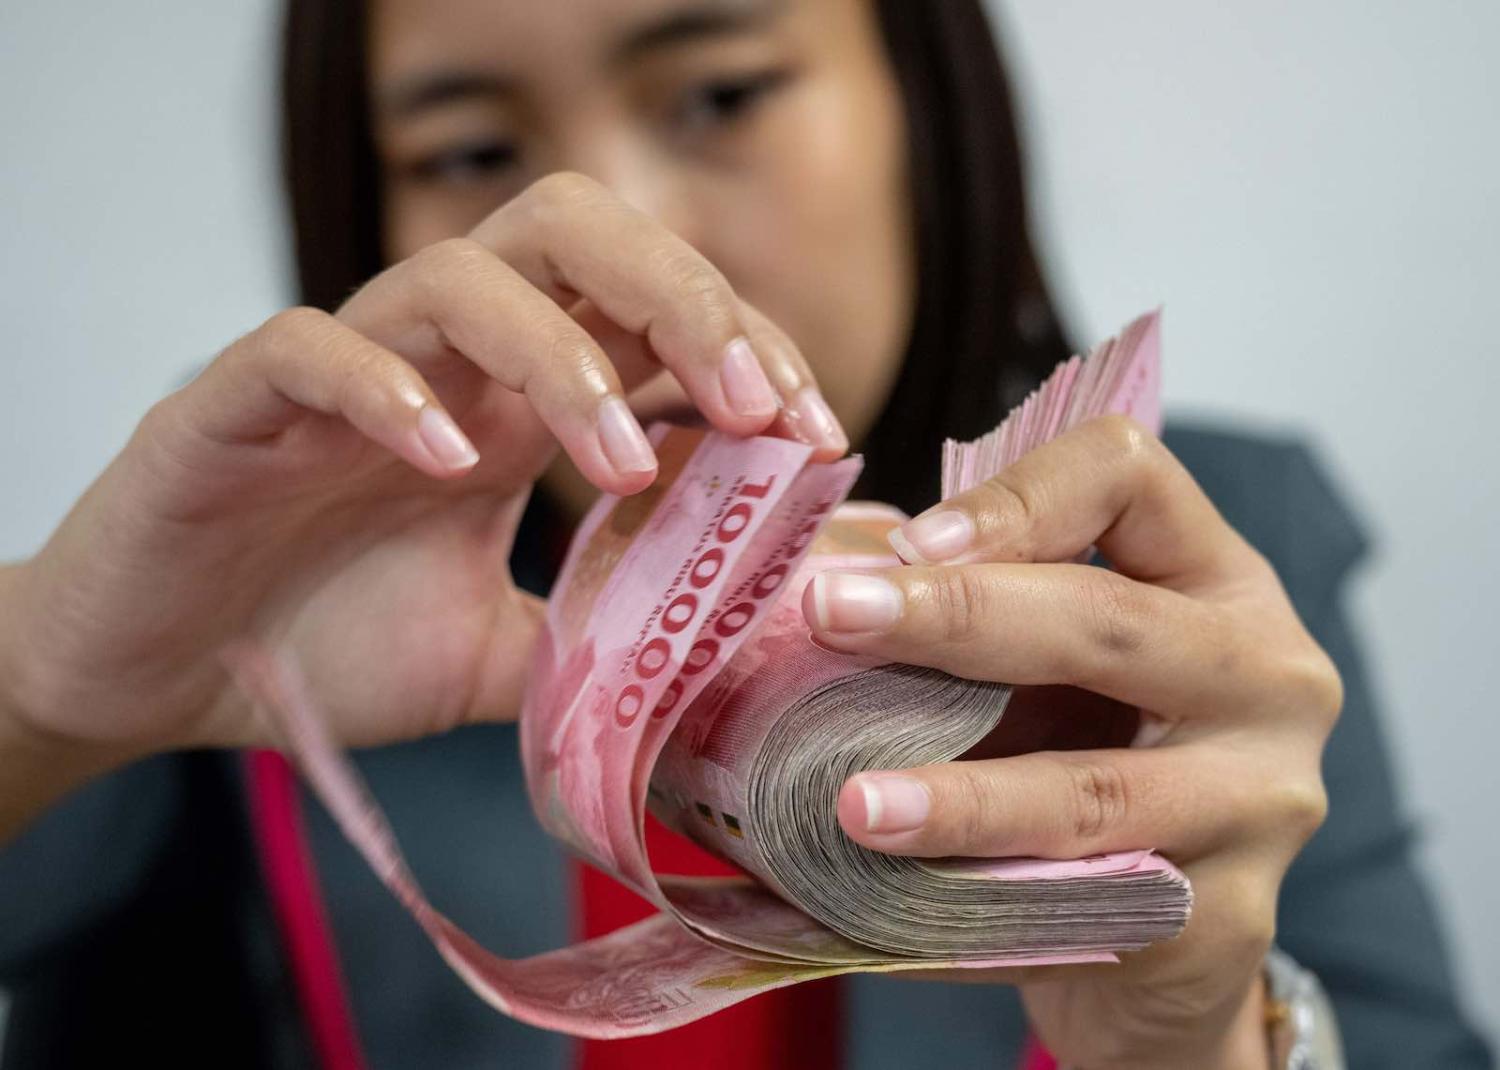 Foreign exchange in Jakarta: the rupiah plummeted in value at the outset of the Covid-19 pandemic (Bay Ismoyo/AFP via Getty Images)